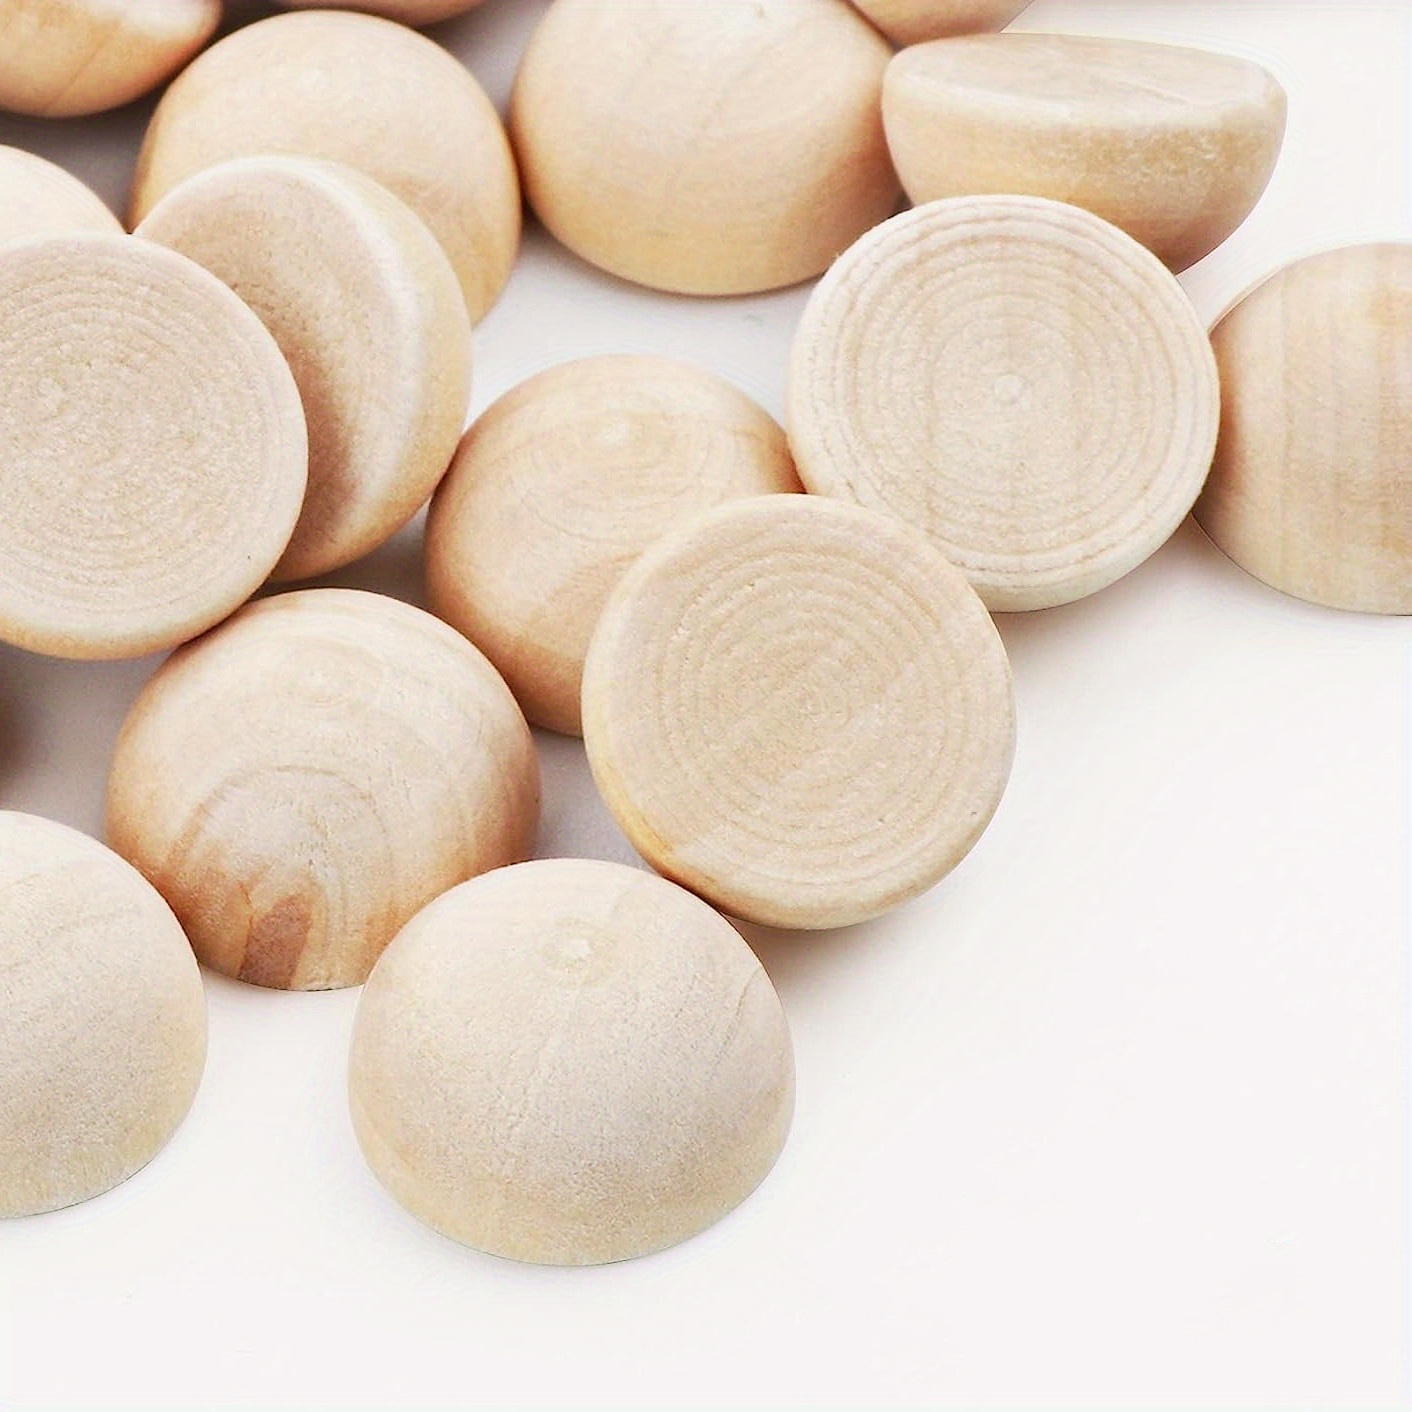 Little wooden spools 1/2 inch set of 12 – Craft Supply House